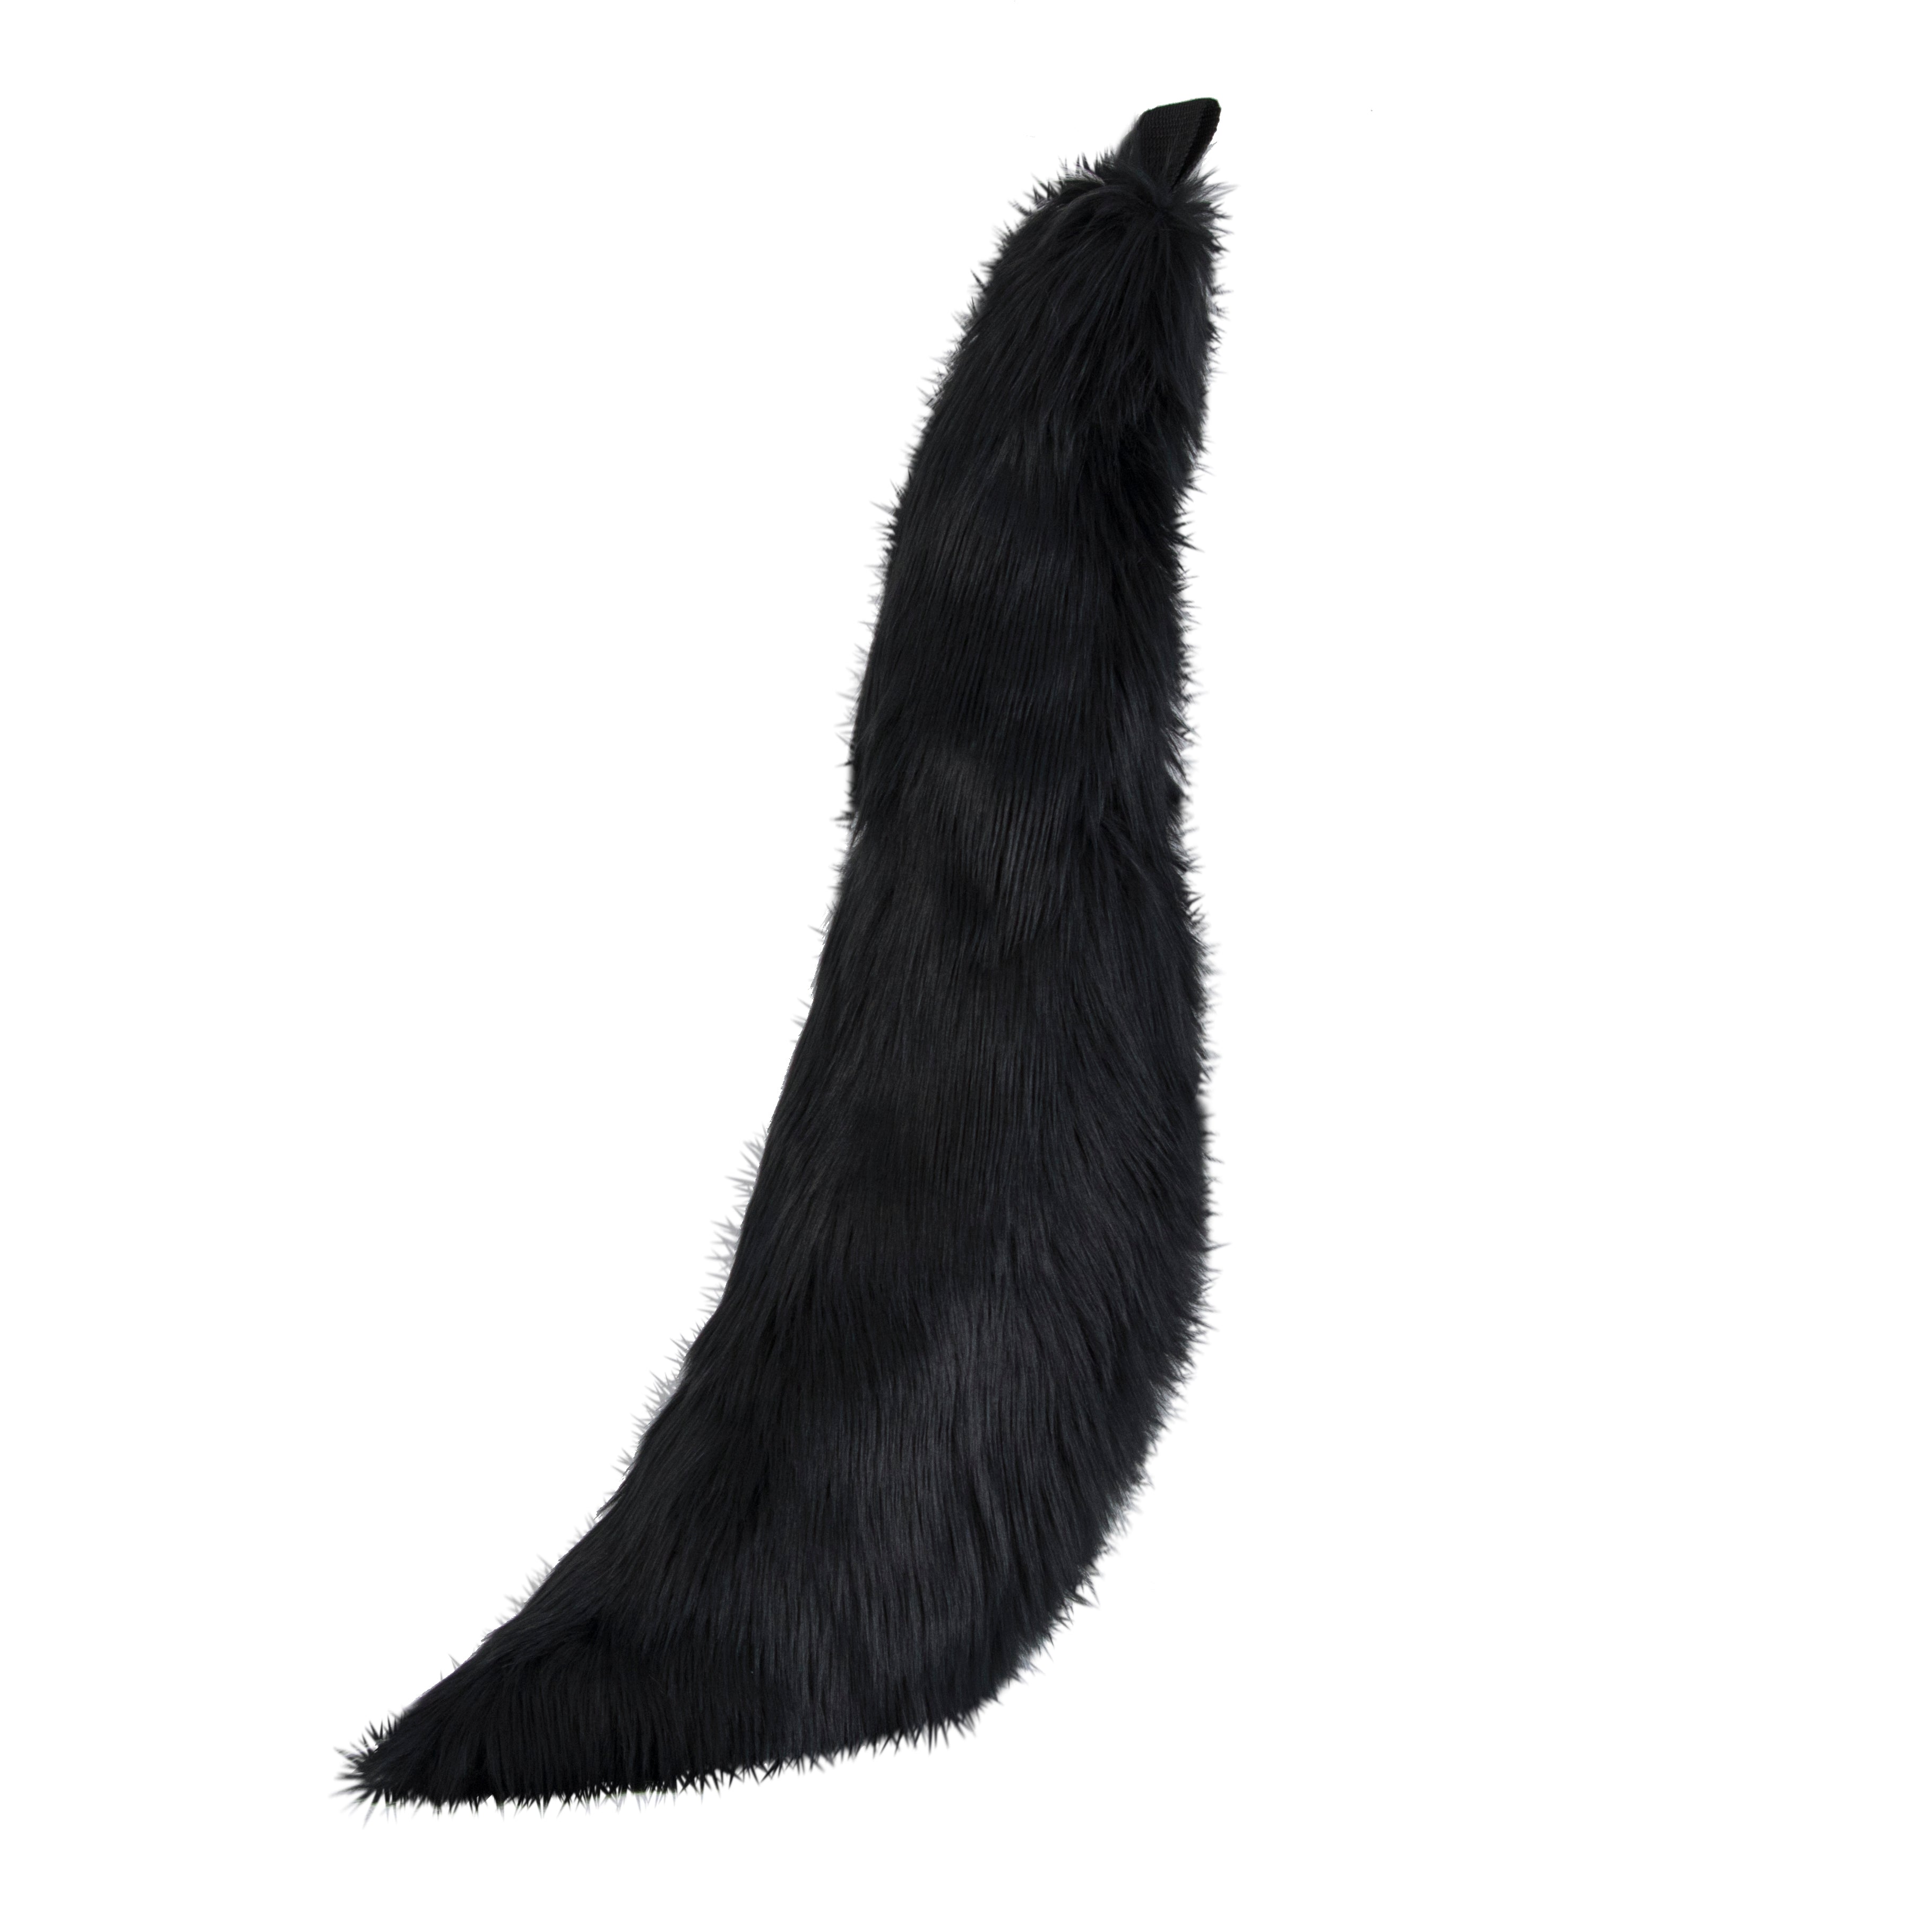 The classic original Pawstar Full Fox Tail made in the usa. Perfect for a partial fursuit, Halloween costume, cosplay or animal festivals!